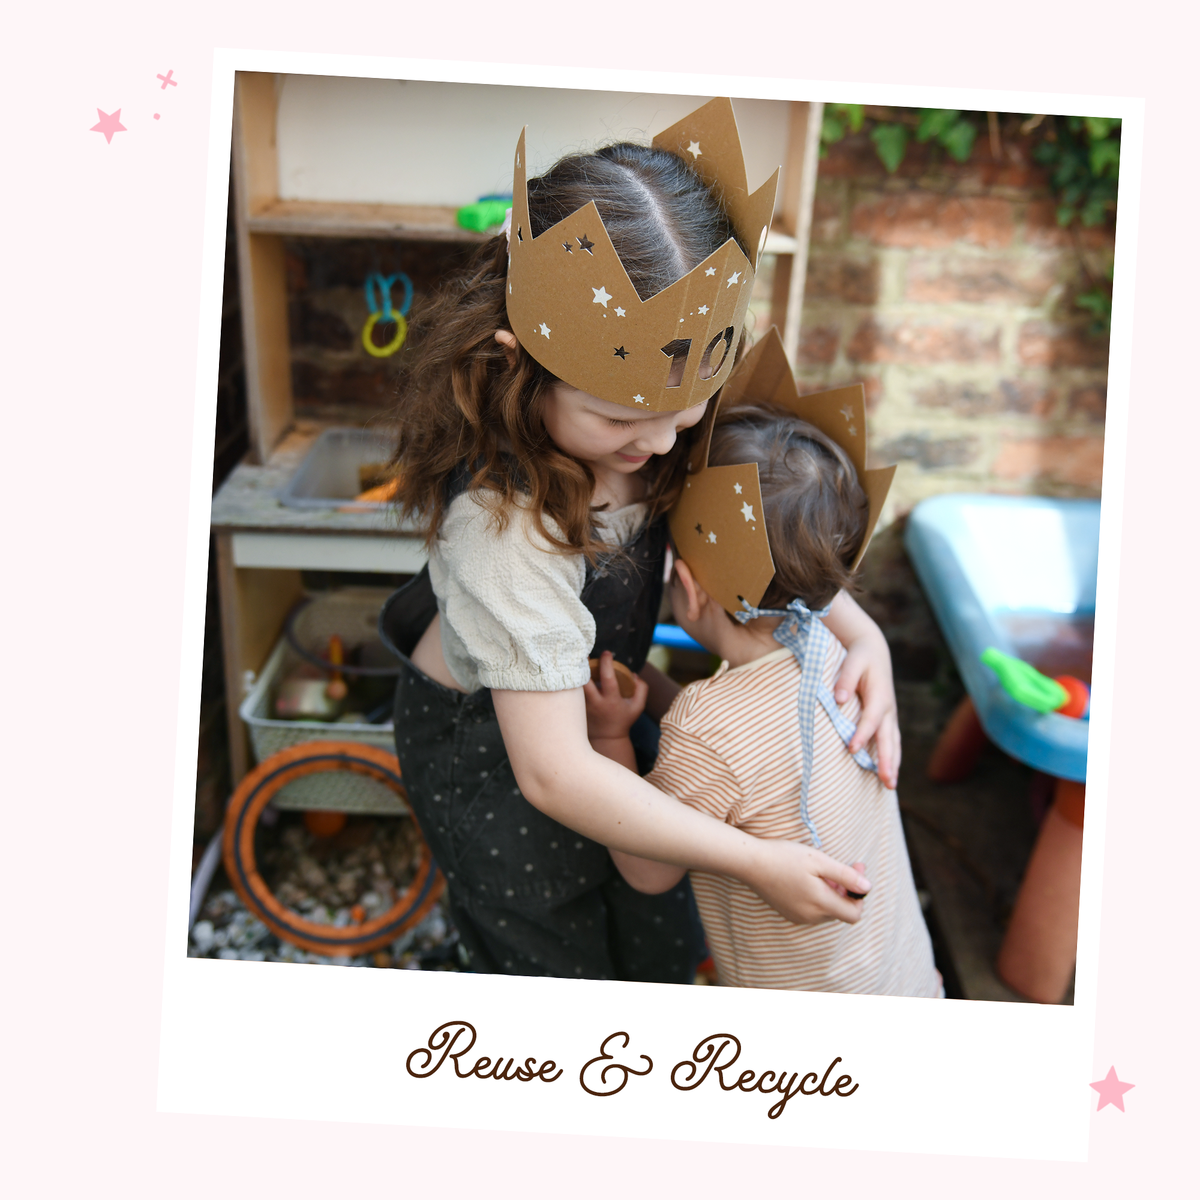 Two young children wearing neutral clothes and handmade cardboard crowns hug each other in front of a mud kitchen.